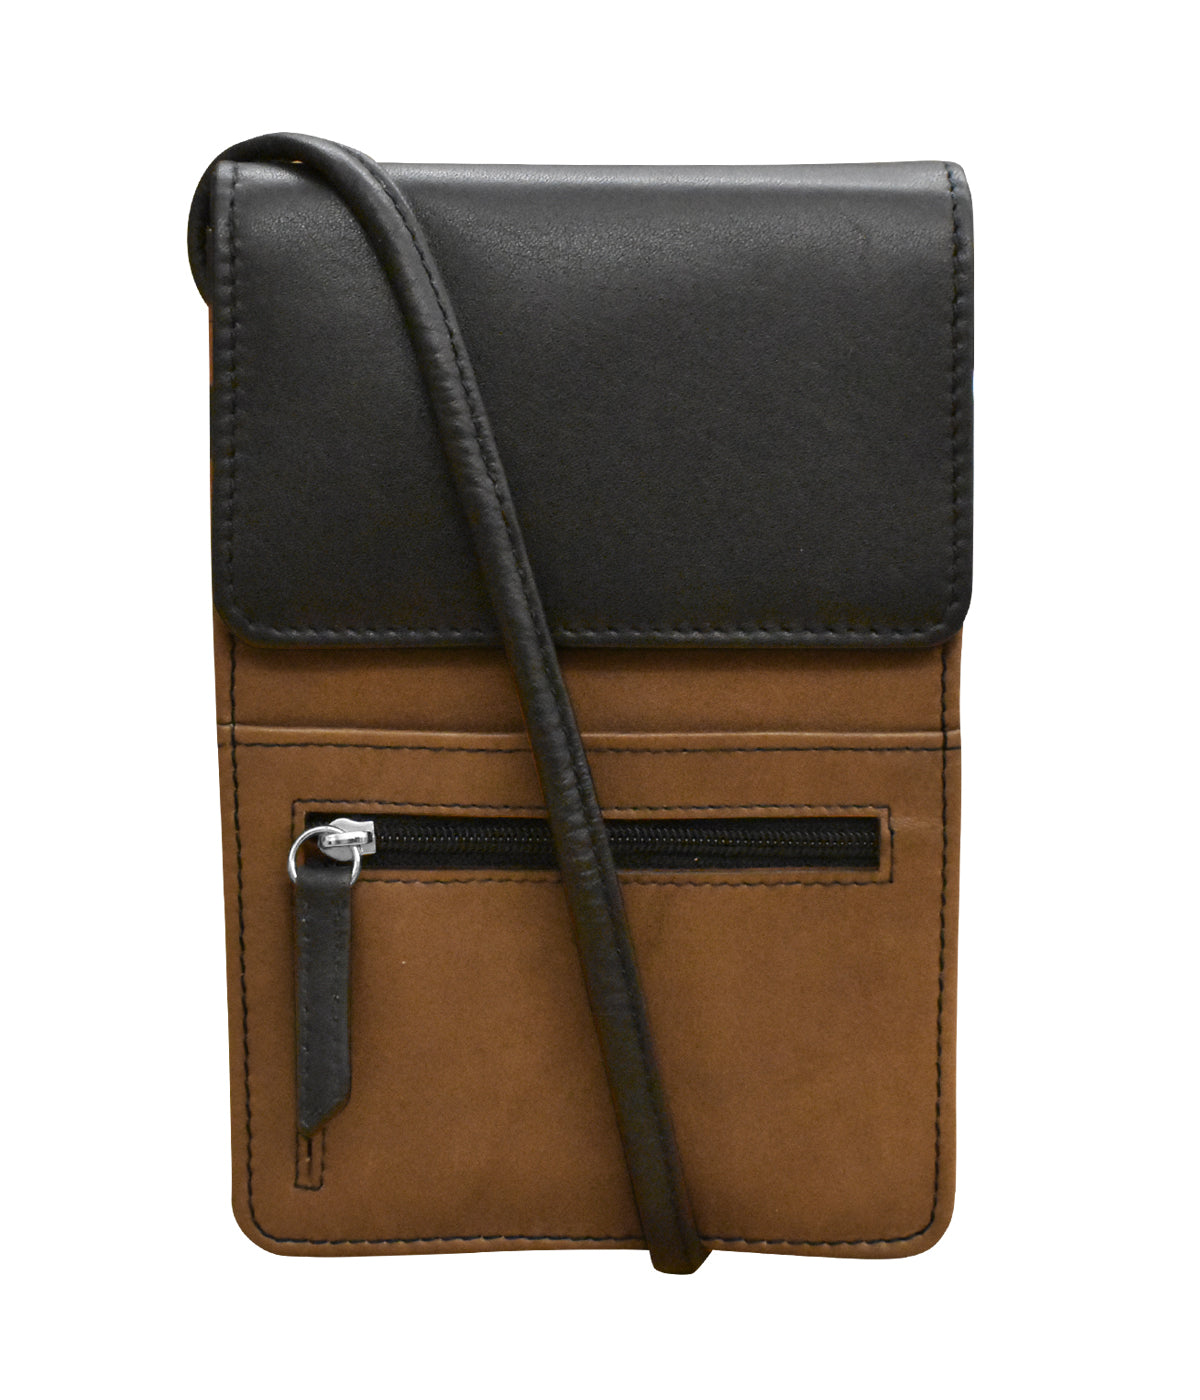 Leather Small Organizer On String Toffee & Black